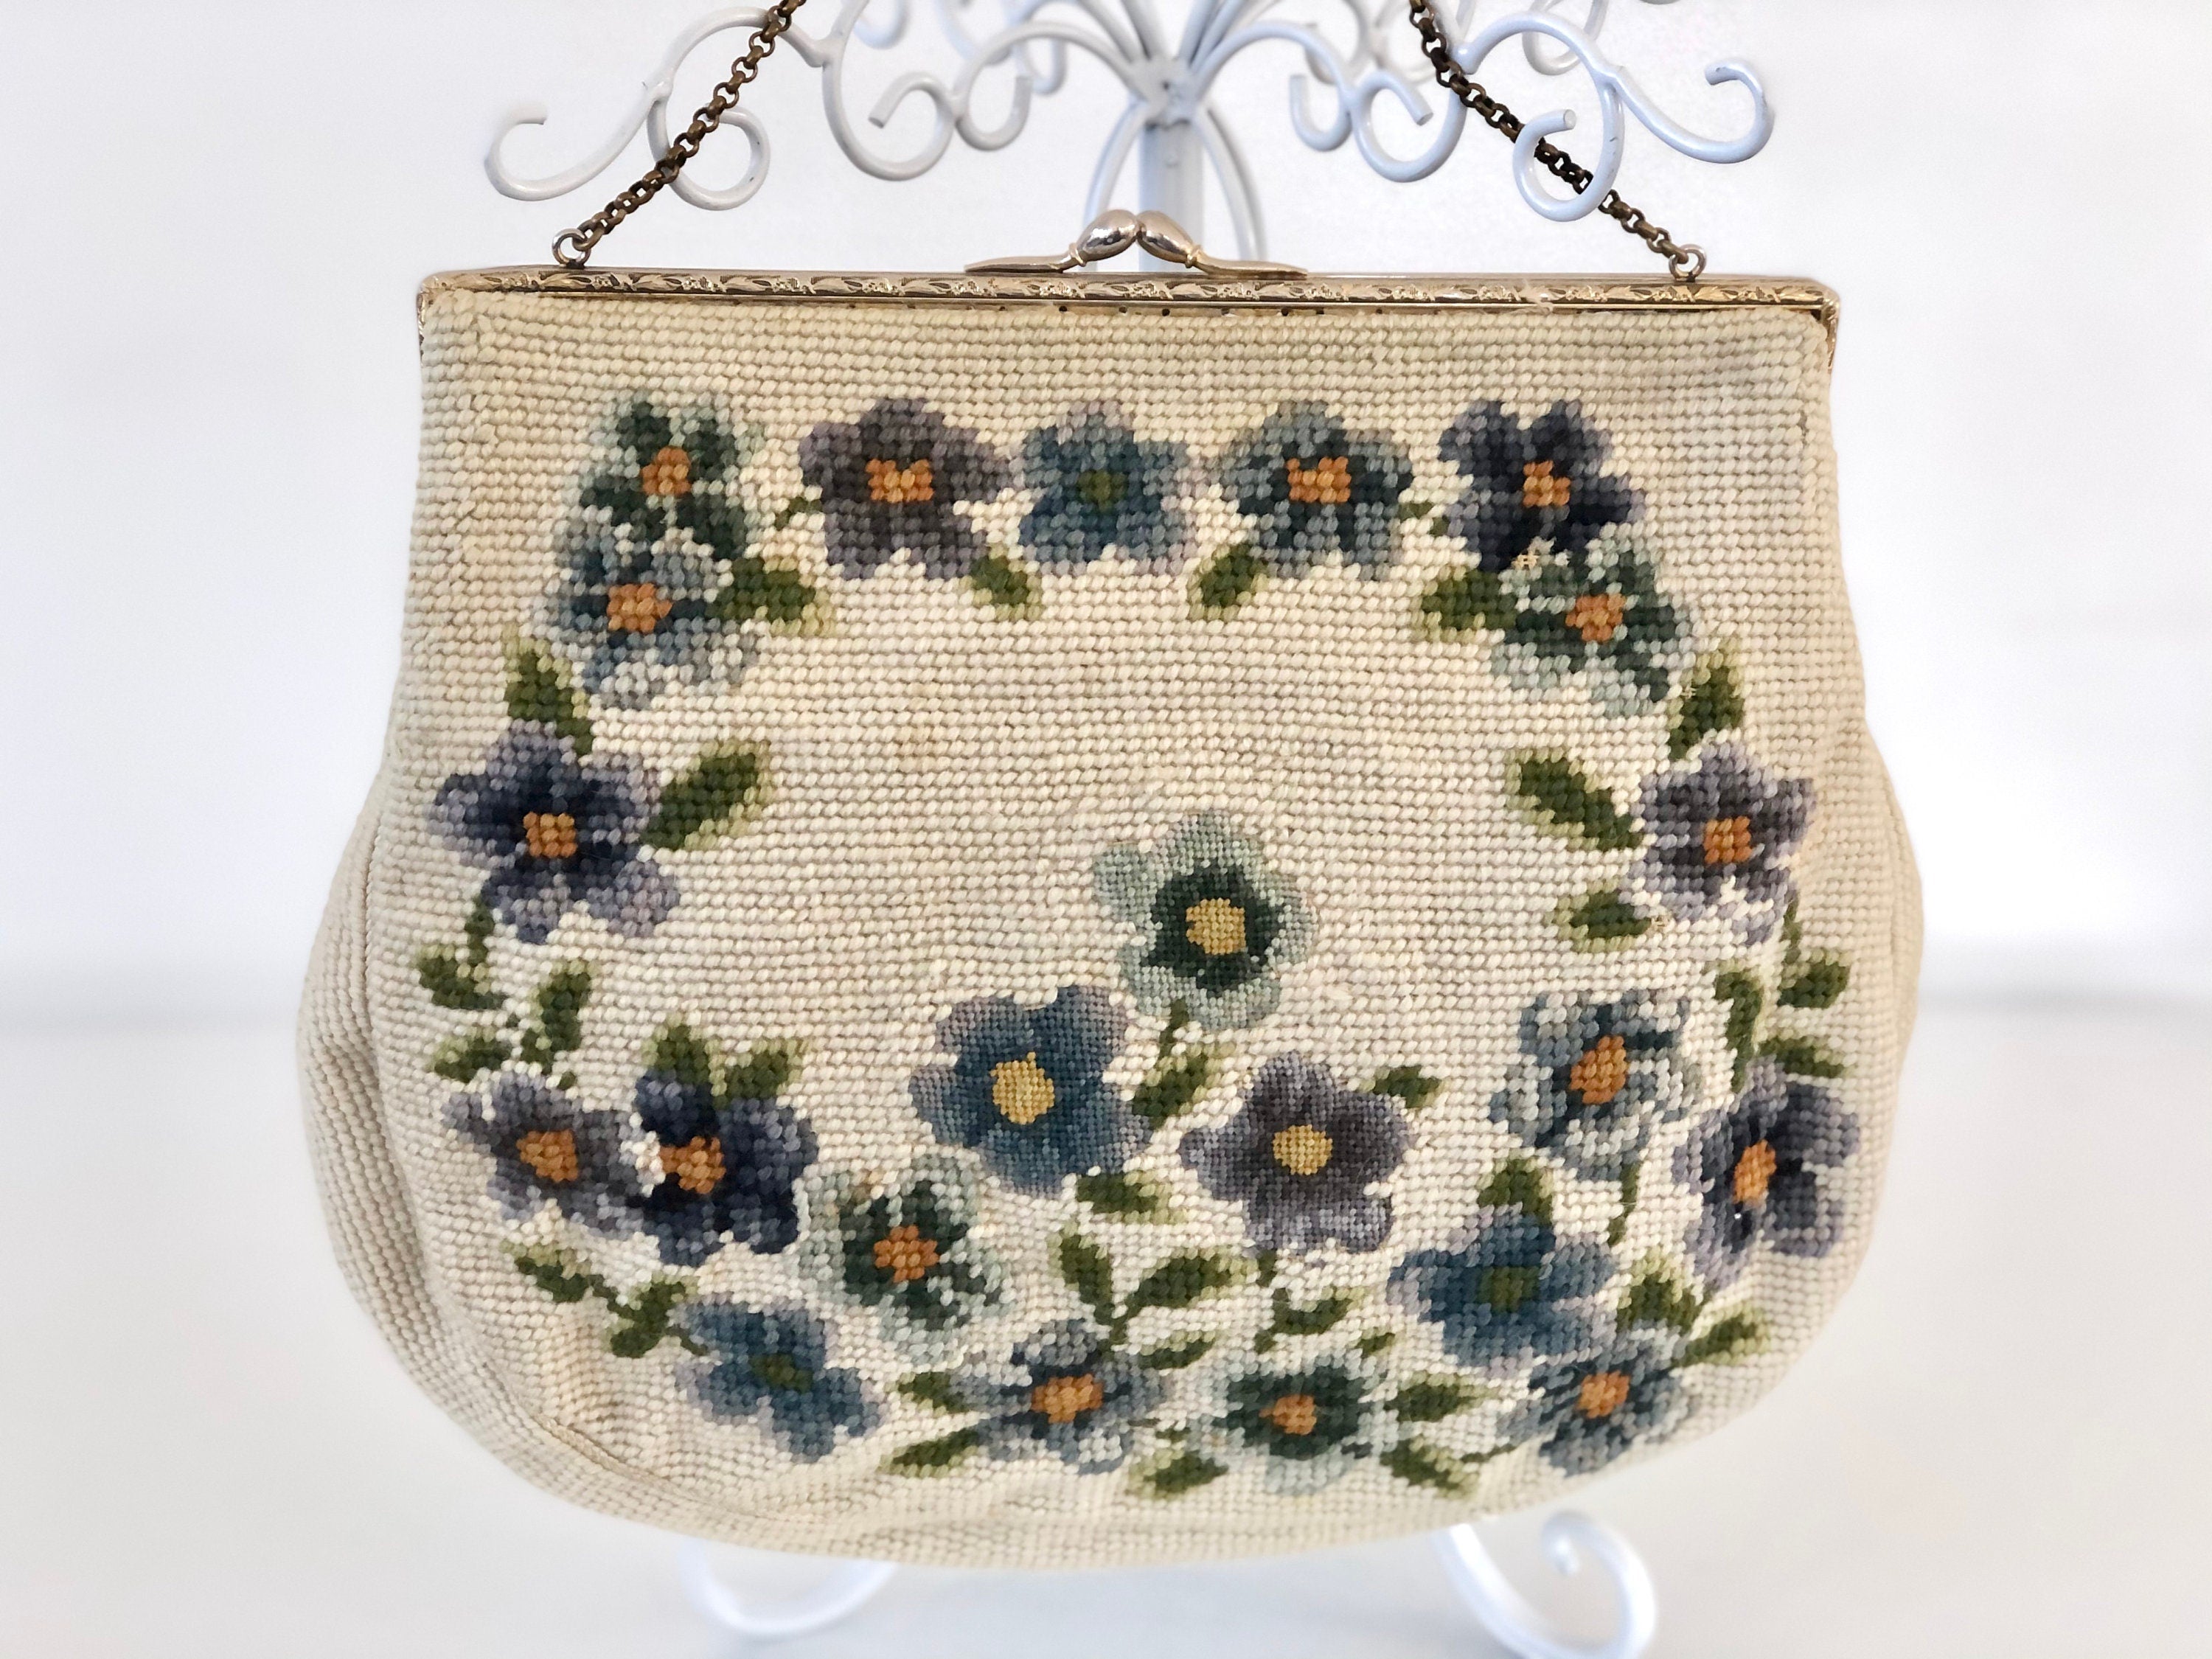 Vintage Needlepoint Bag Purse with Metal Frame and Chain Handle